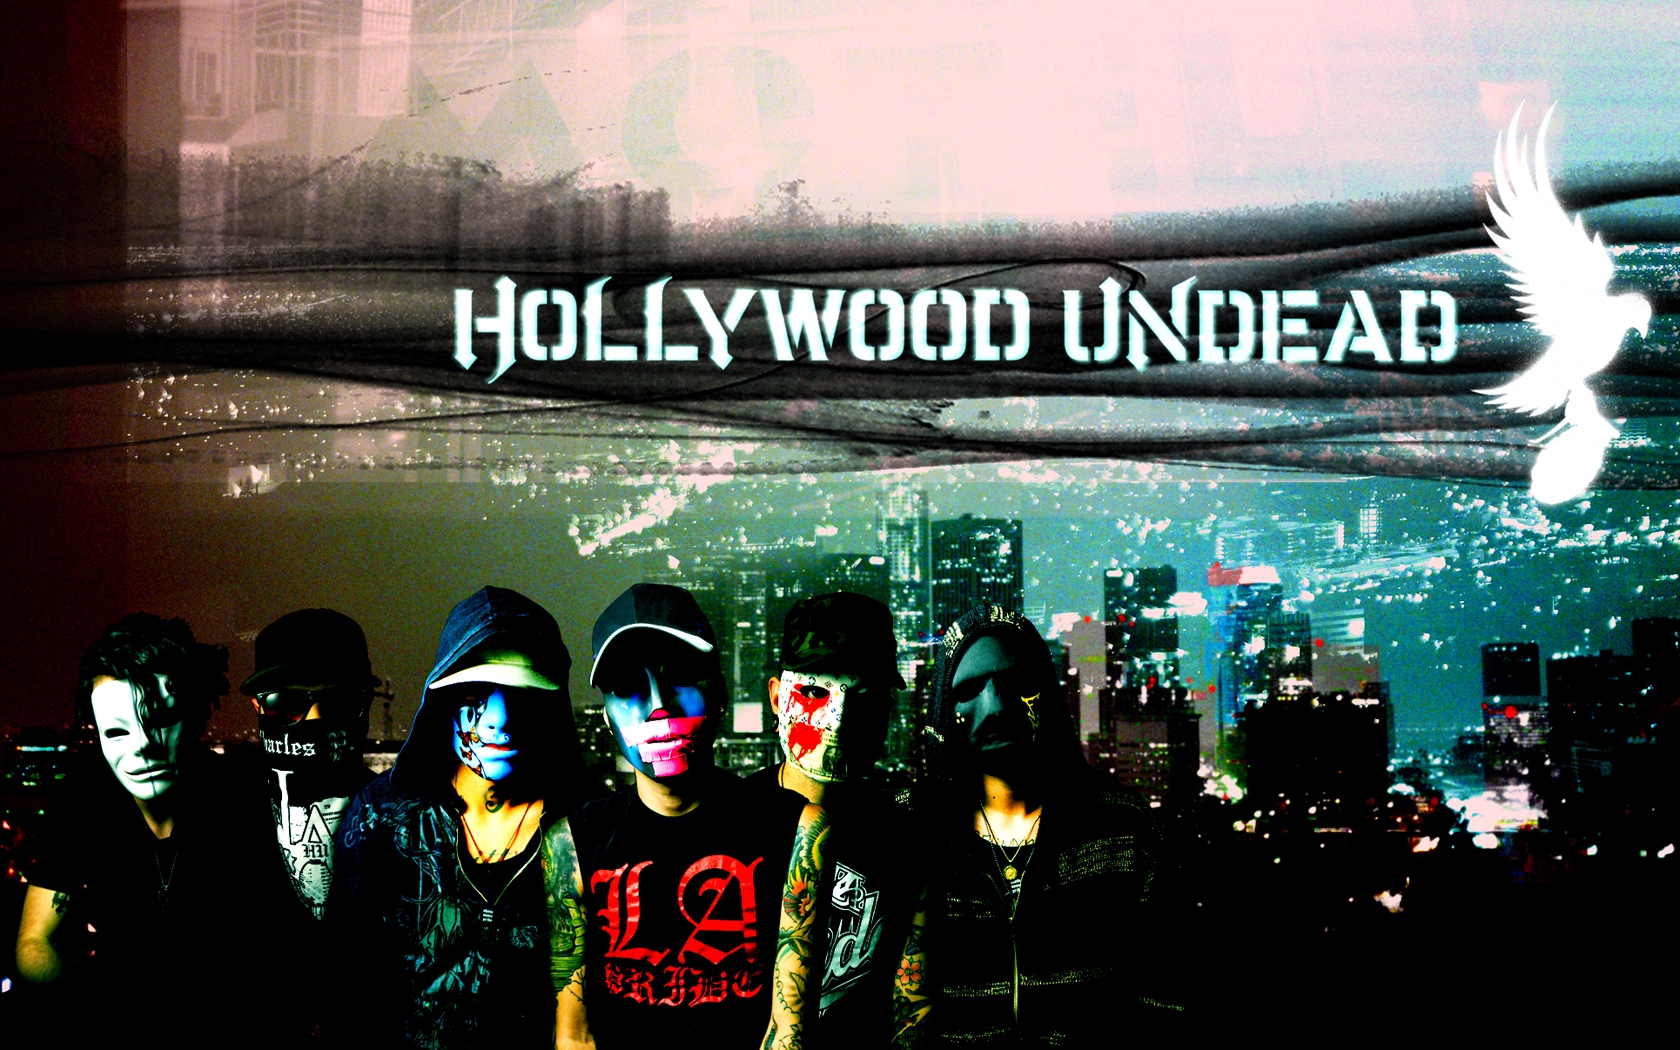 Wallpaper Hollywood Undead - Hollywood Undead , HD Wallpaper & Backgrounds